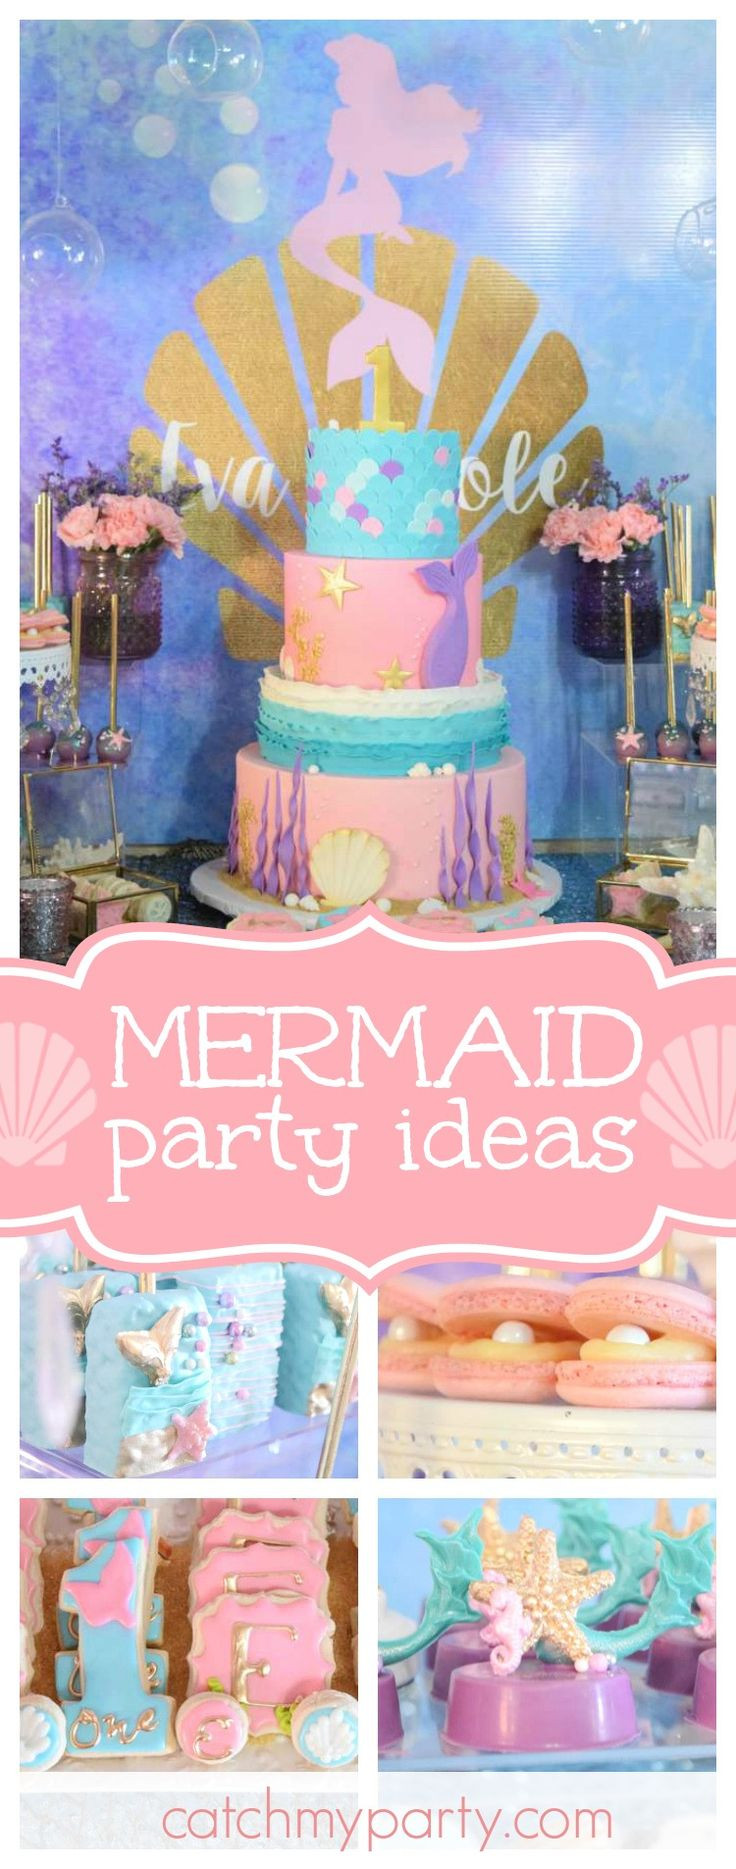 1St Birthday Pool Party Ideas
 554 best images about Under the Sea Party Ideas on Pinterest